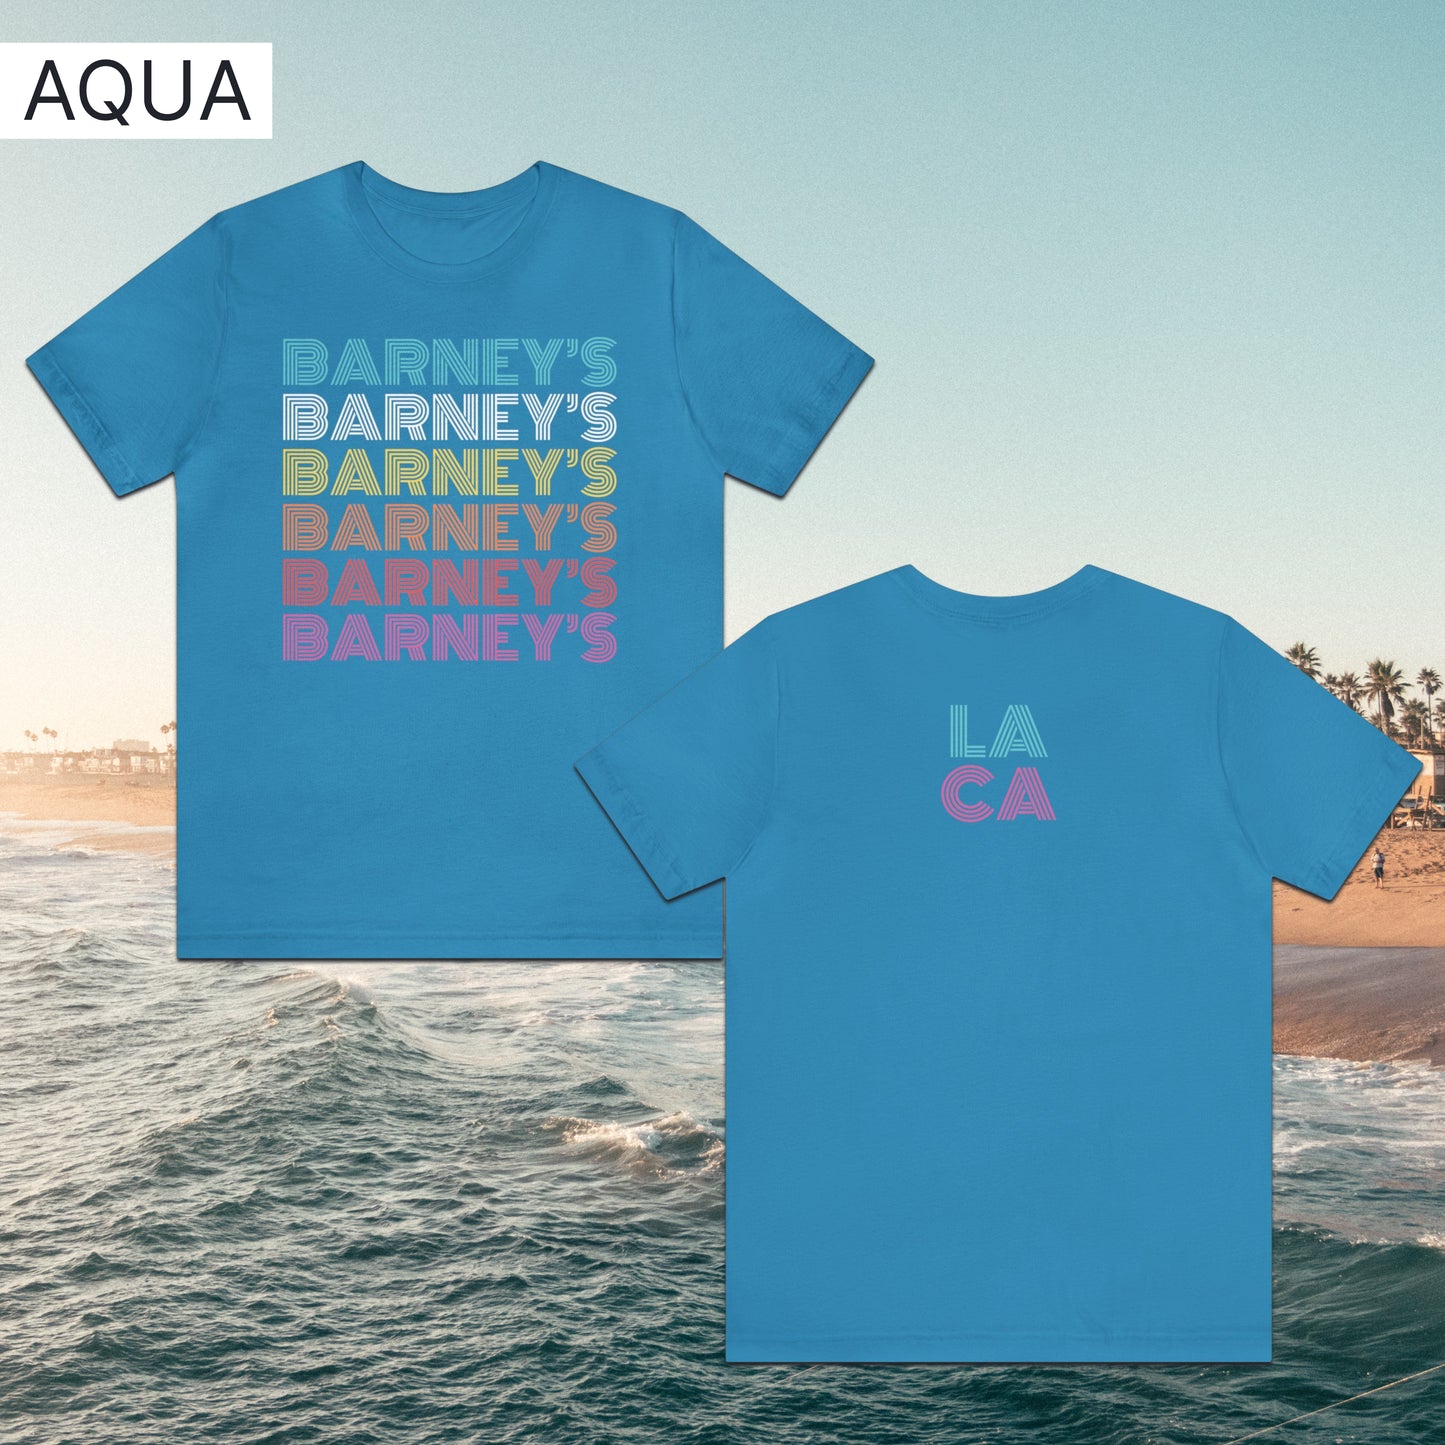 Barney's x6 Retro Hollywood | BARNEY'S BEANERY - Men's Retro Graphic Tee | Aqua Bella+Canvas 3001 T-Shirt - Front And Back Flat Lay View